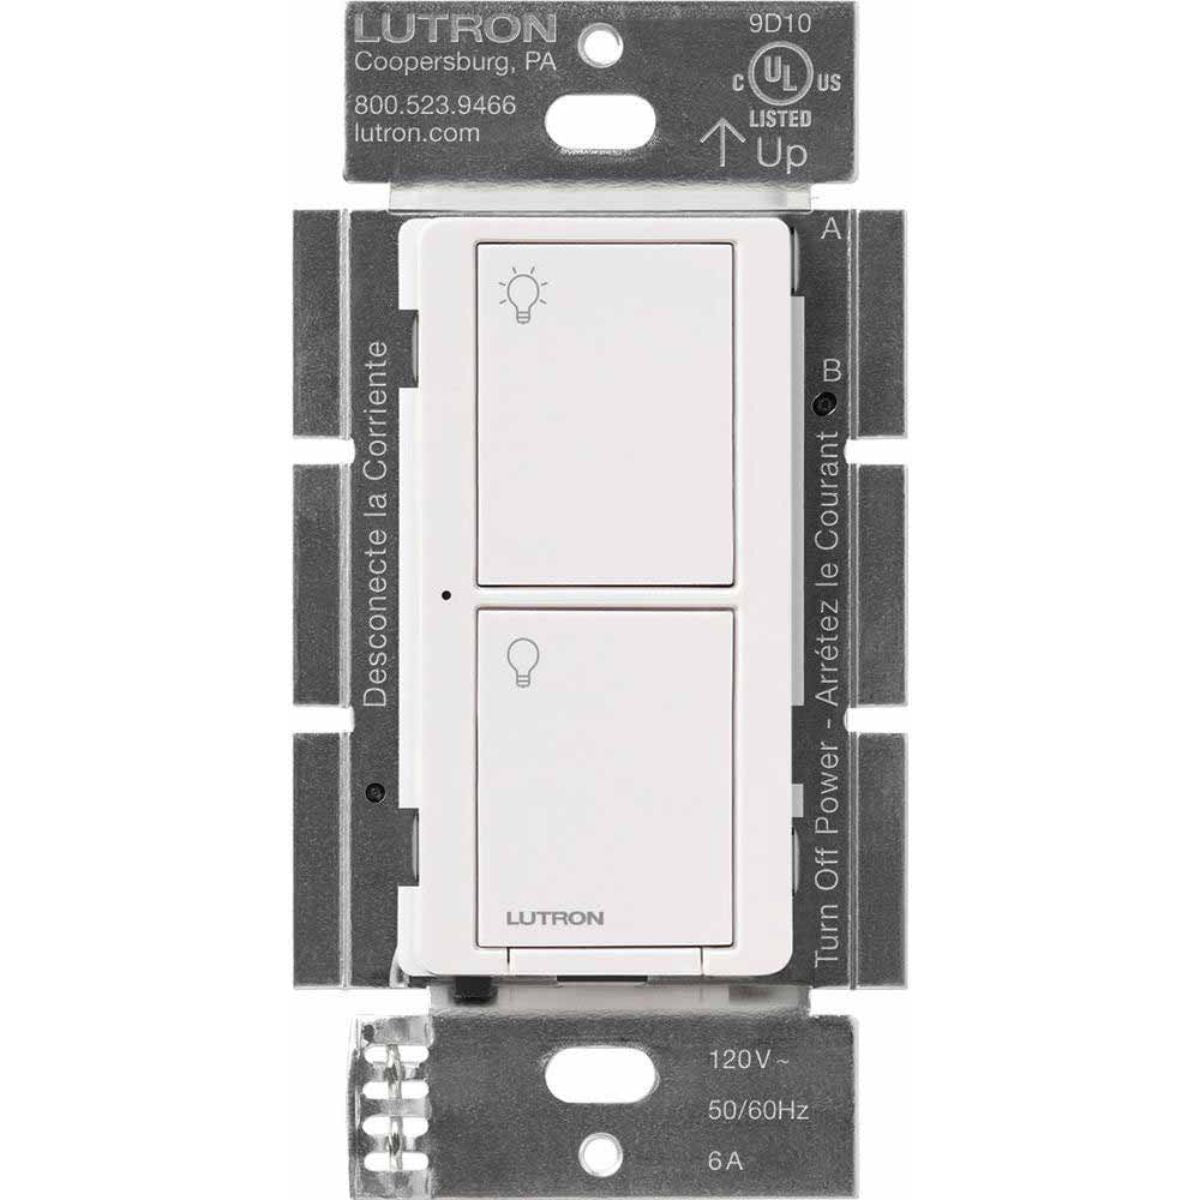 Caseta Wireless 3-Way Tap Smart Light Switch Neutral Required - Bees Lighting